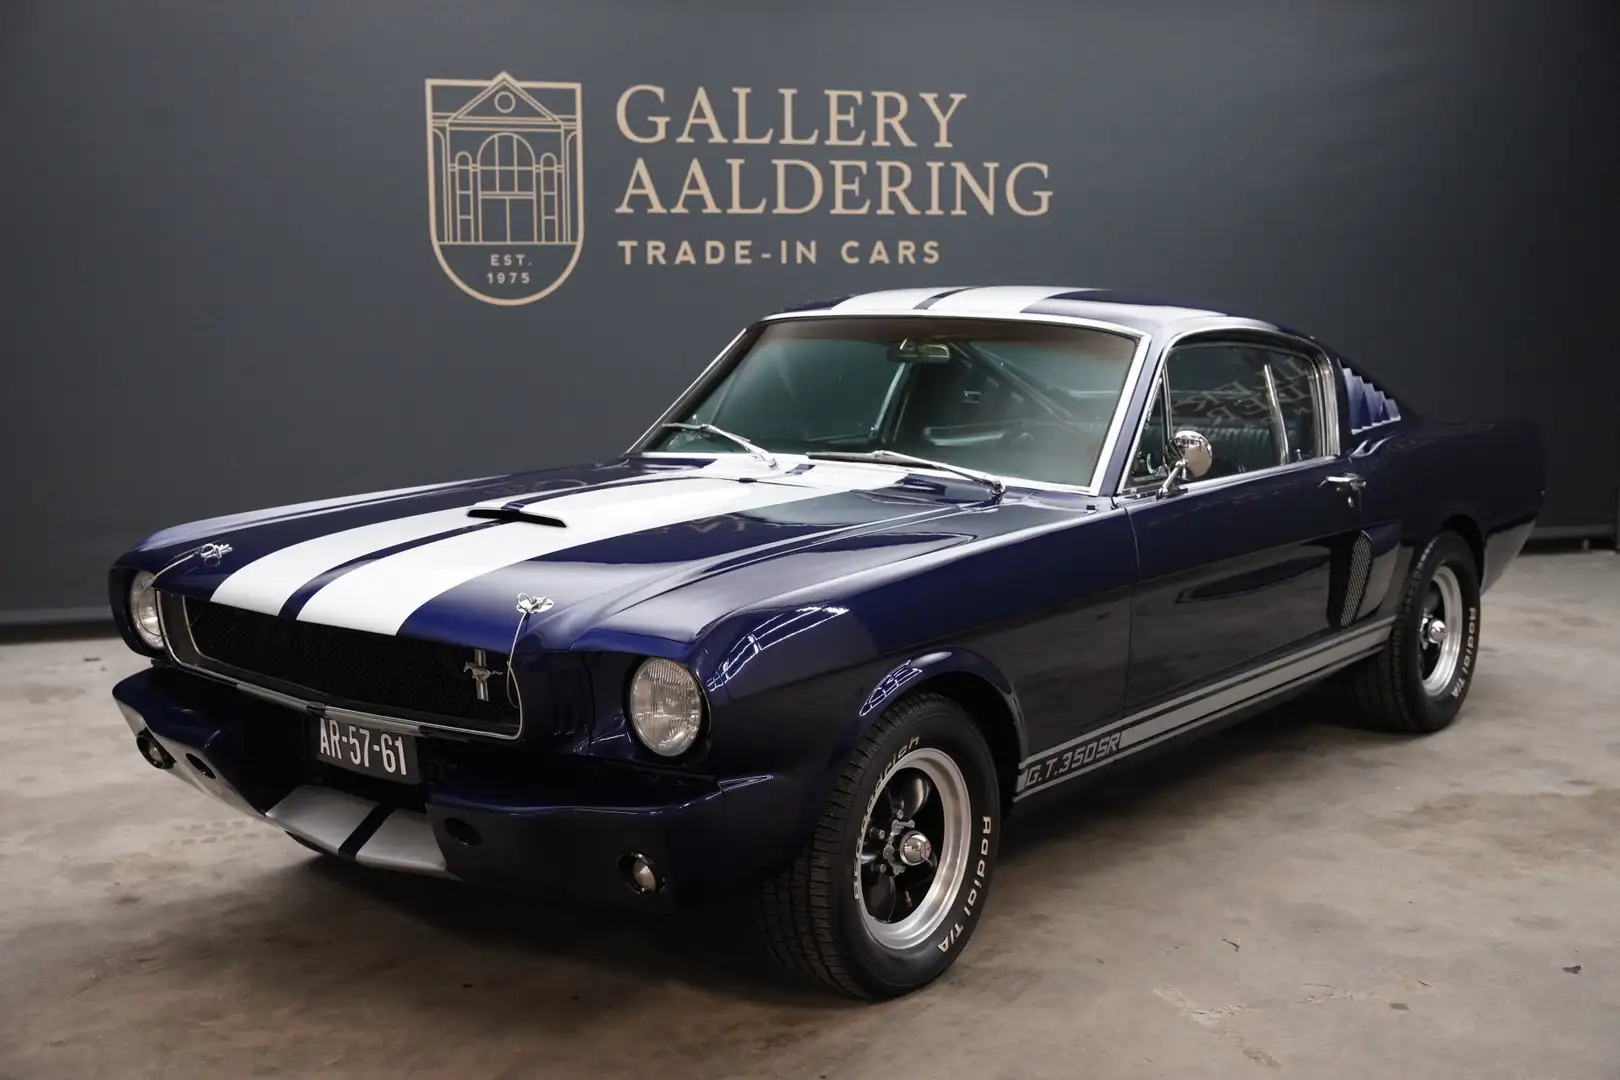 Ford Mustang Fastback "Shelby 350 SR Clone" (A-code) Trade-in c Blauw - 1